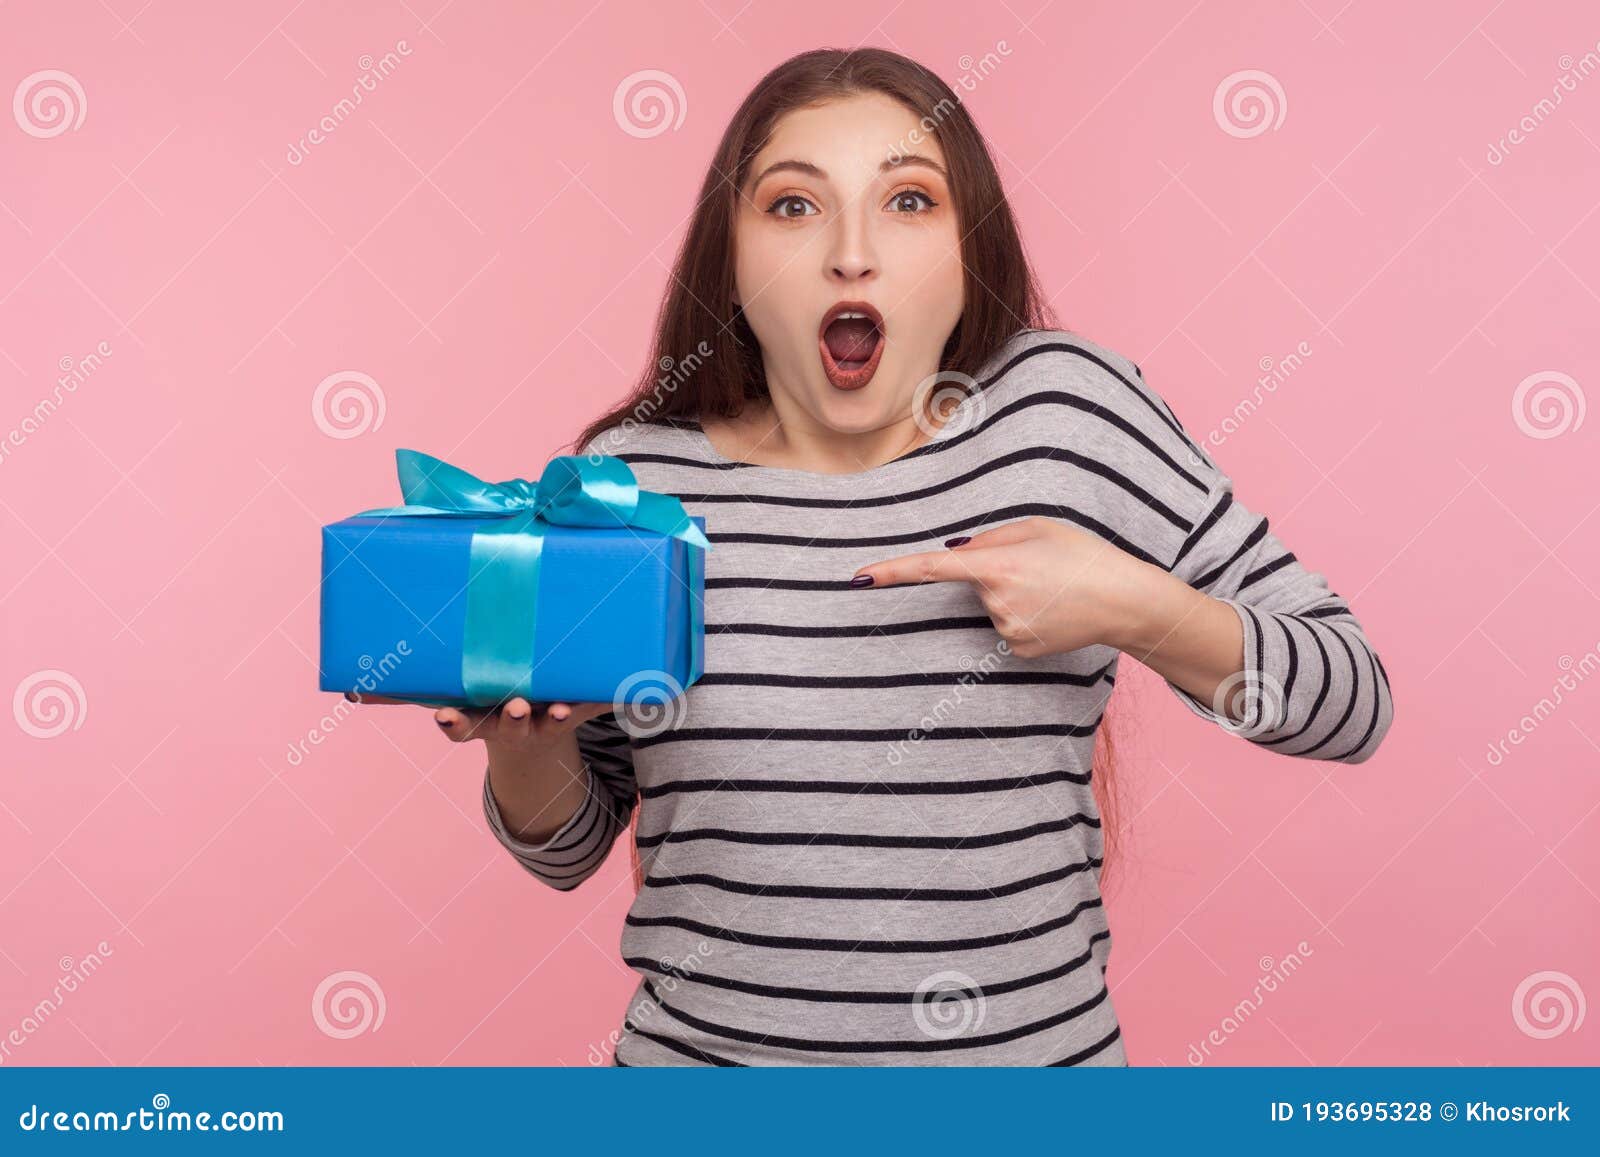 portrait of excited amazed woman in striped sweatshirt pointing at birthday gift and looking surprised